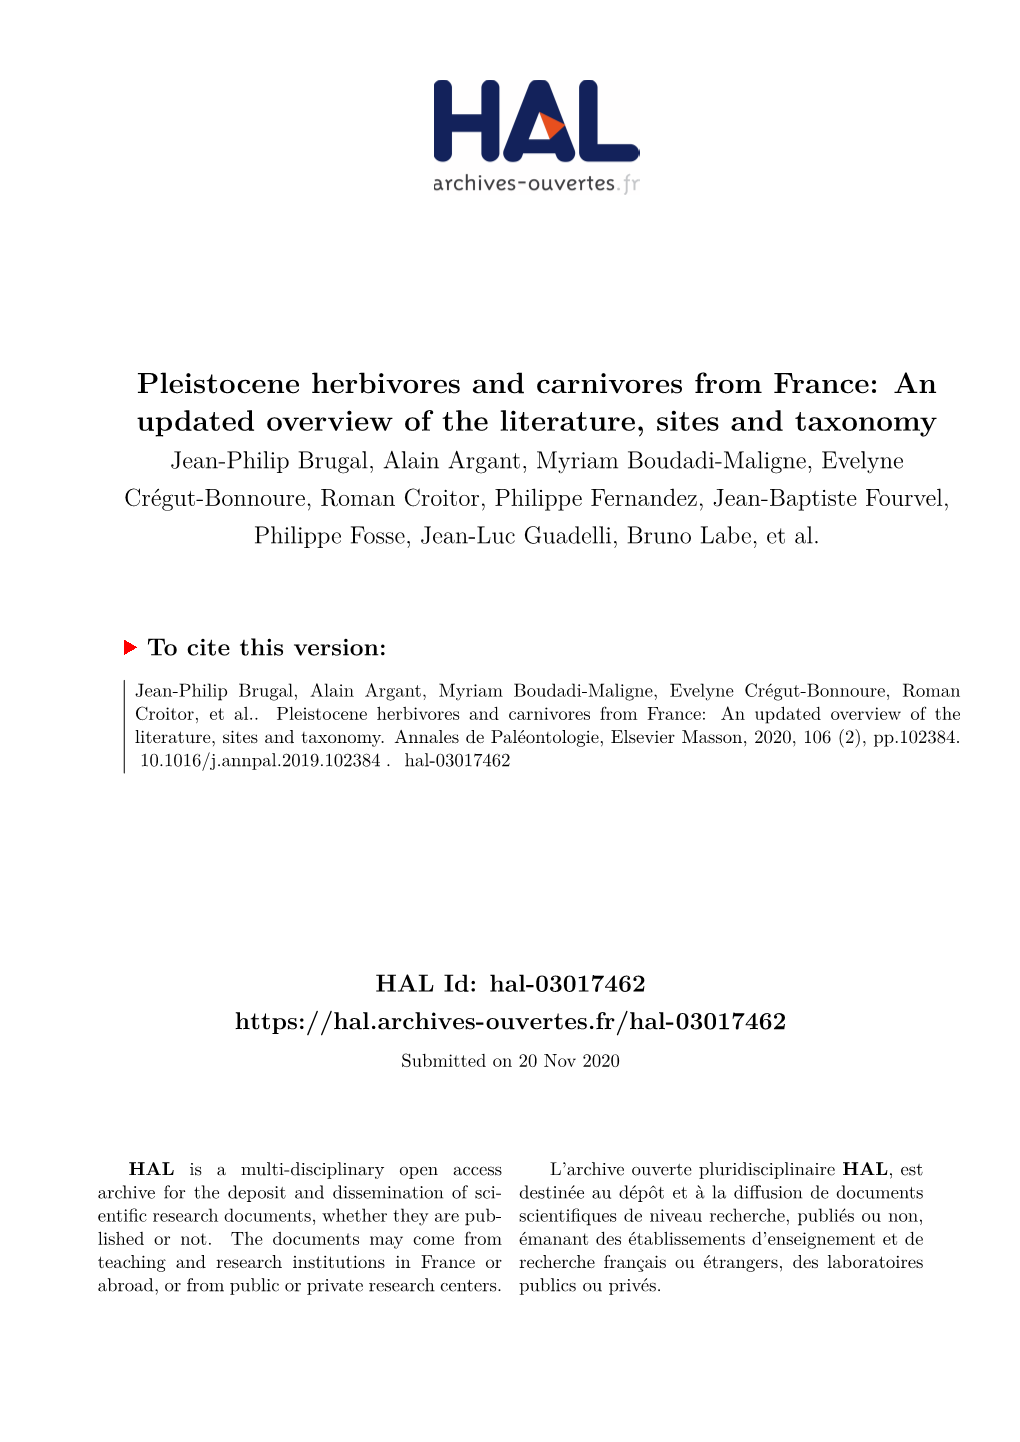 Pleistocene Herbivores and Carnivores from France